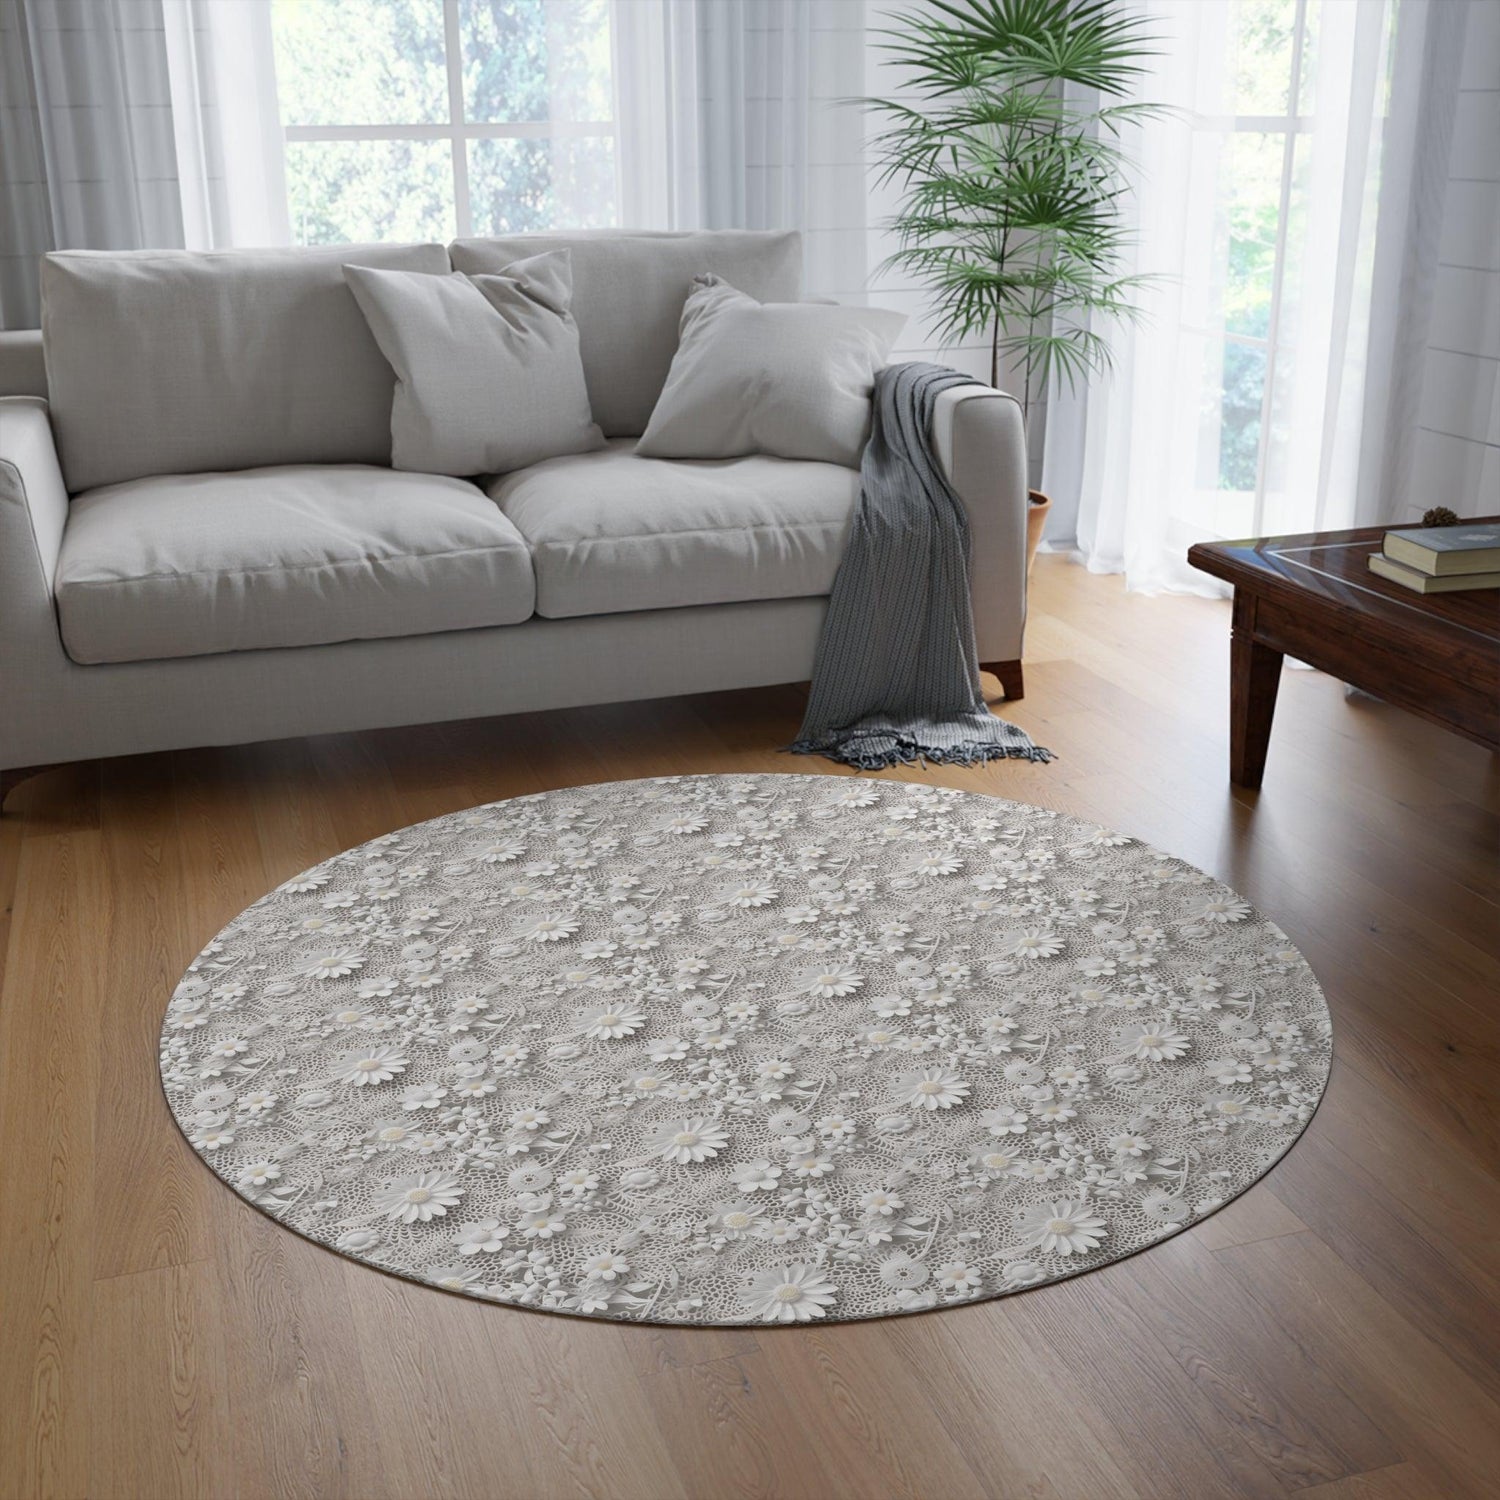 Rugs Artisanal Rugs Collection Timeless Elegance for Sophisticated Interiors.